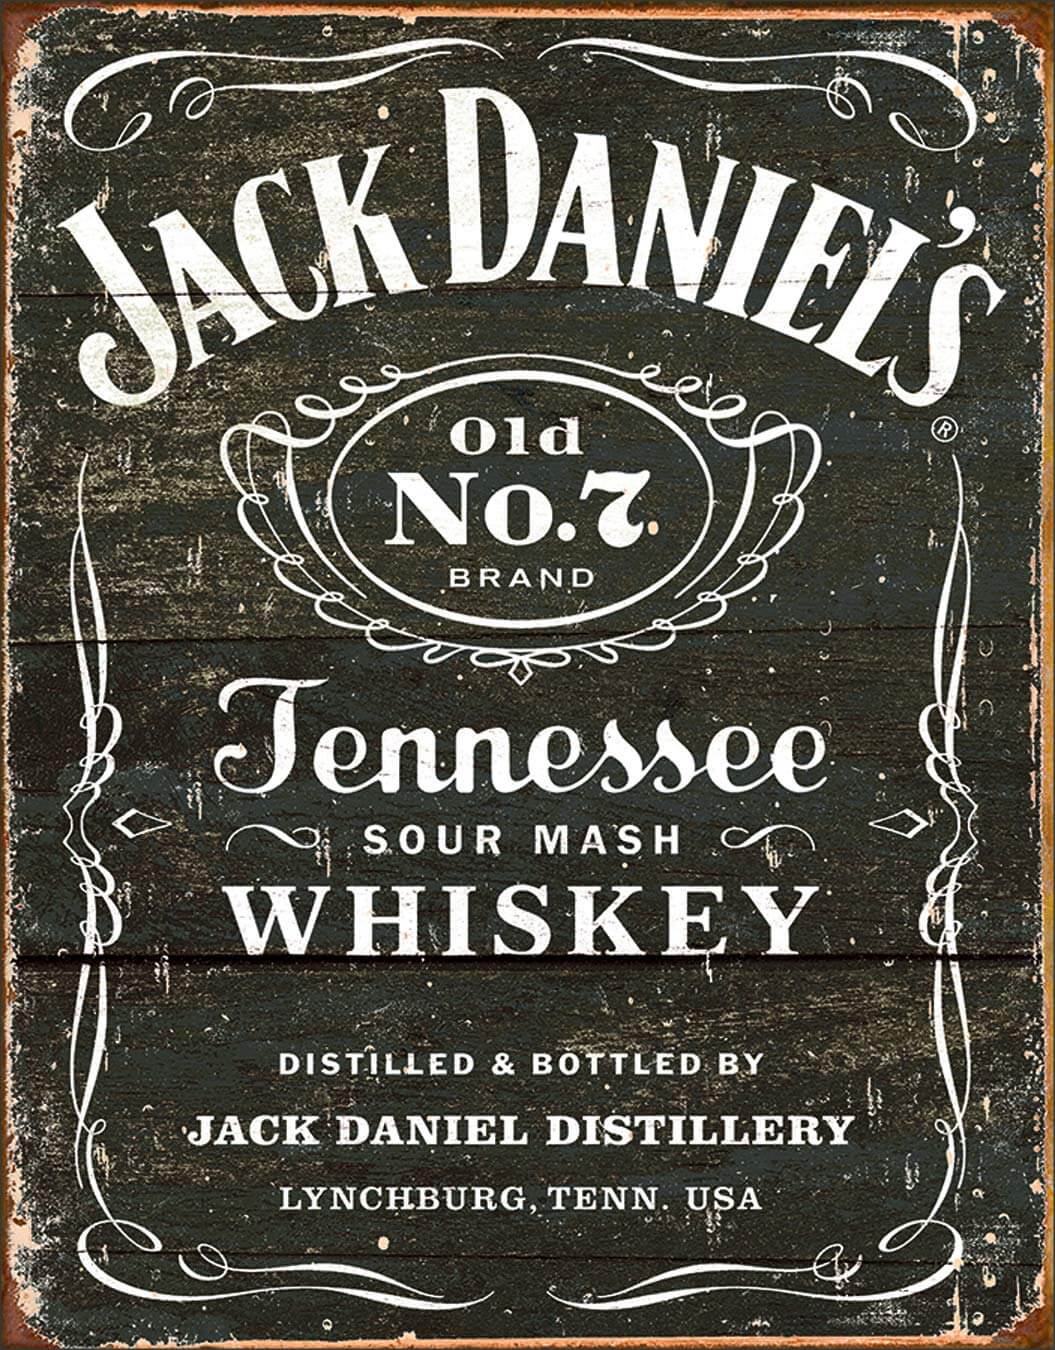 Old-School Jack Daniel’s Tennessee Whiskey Sign